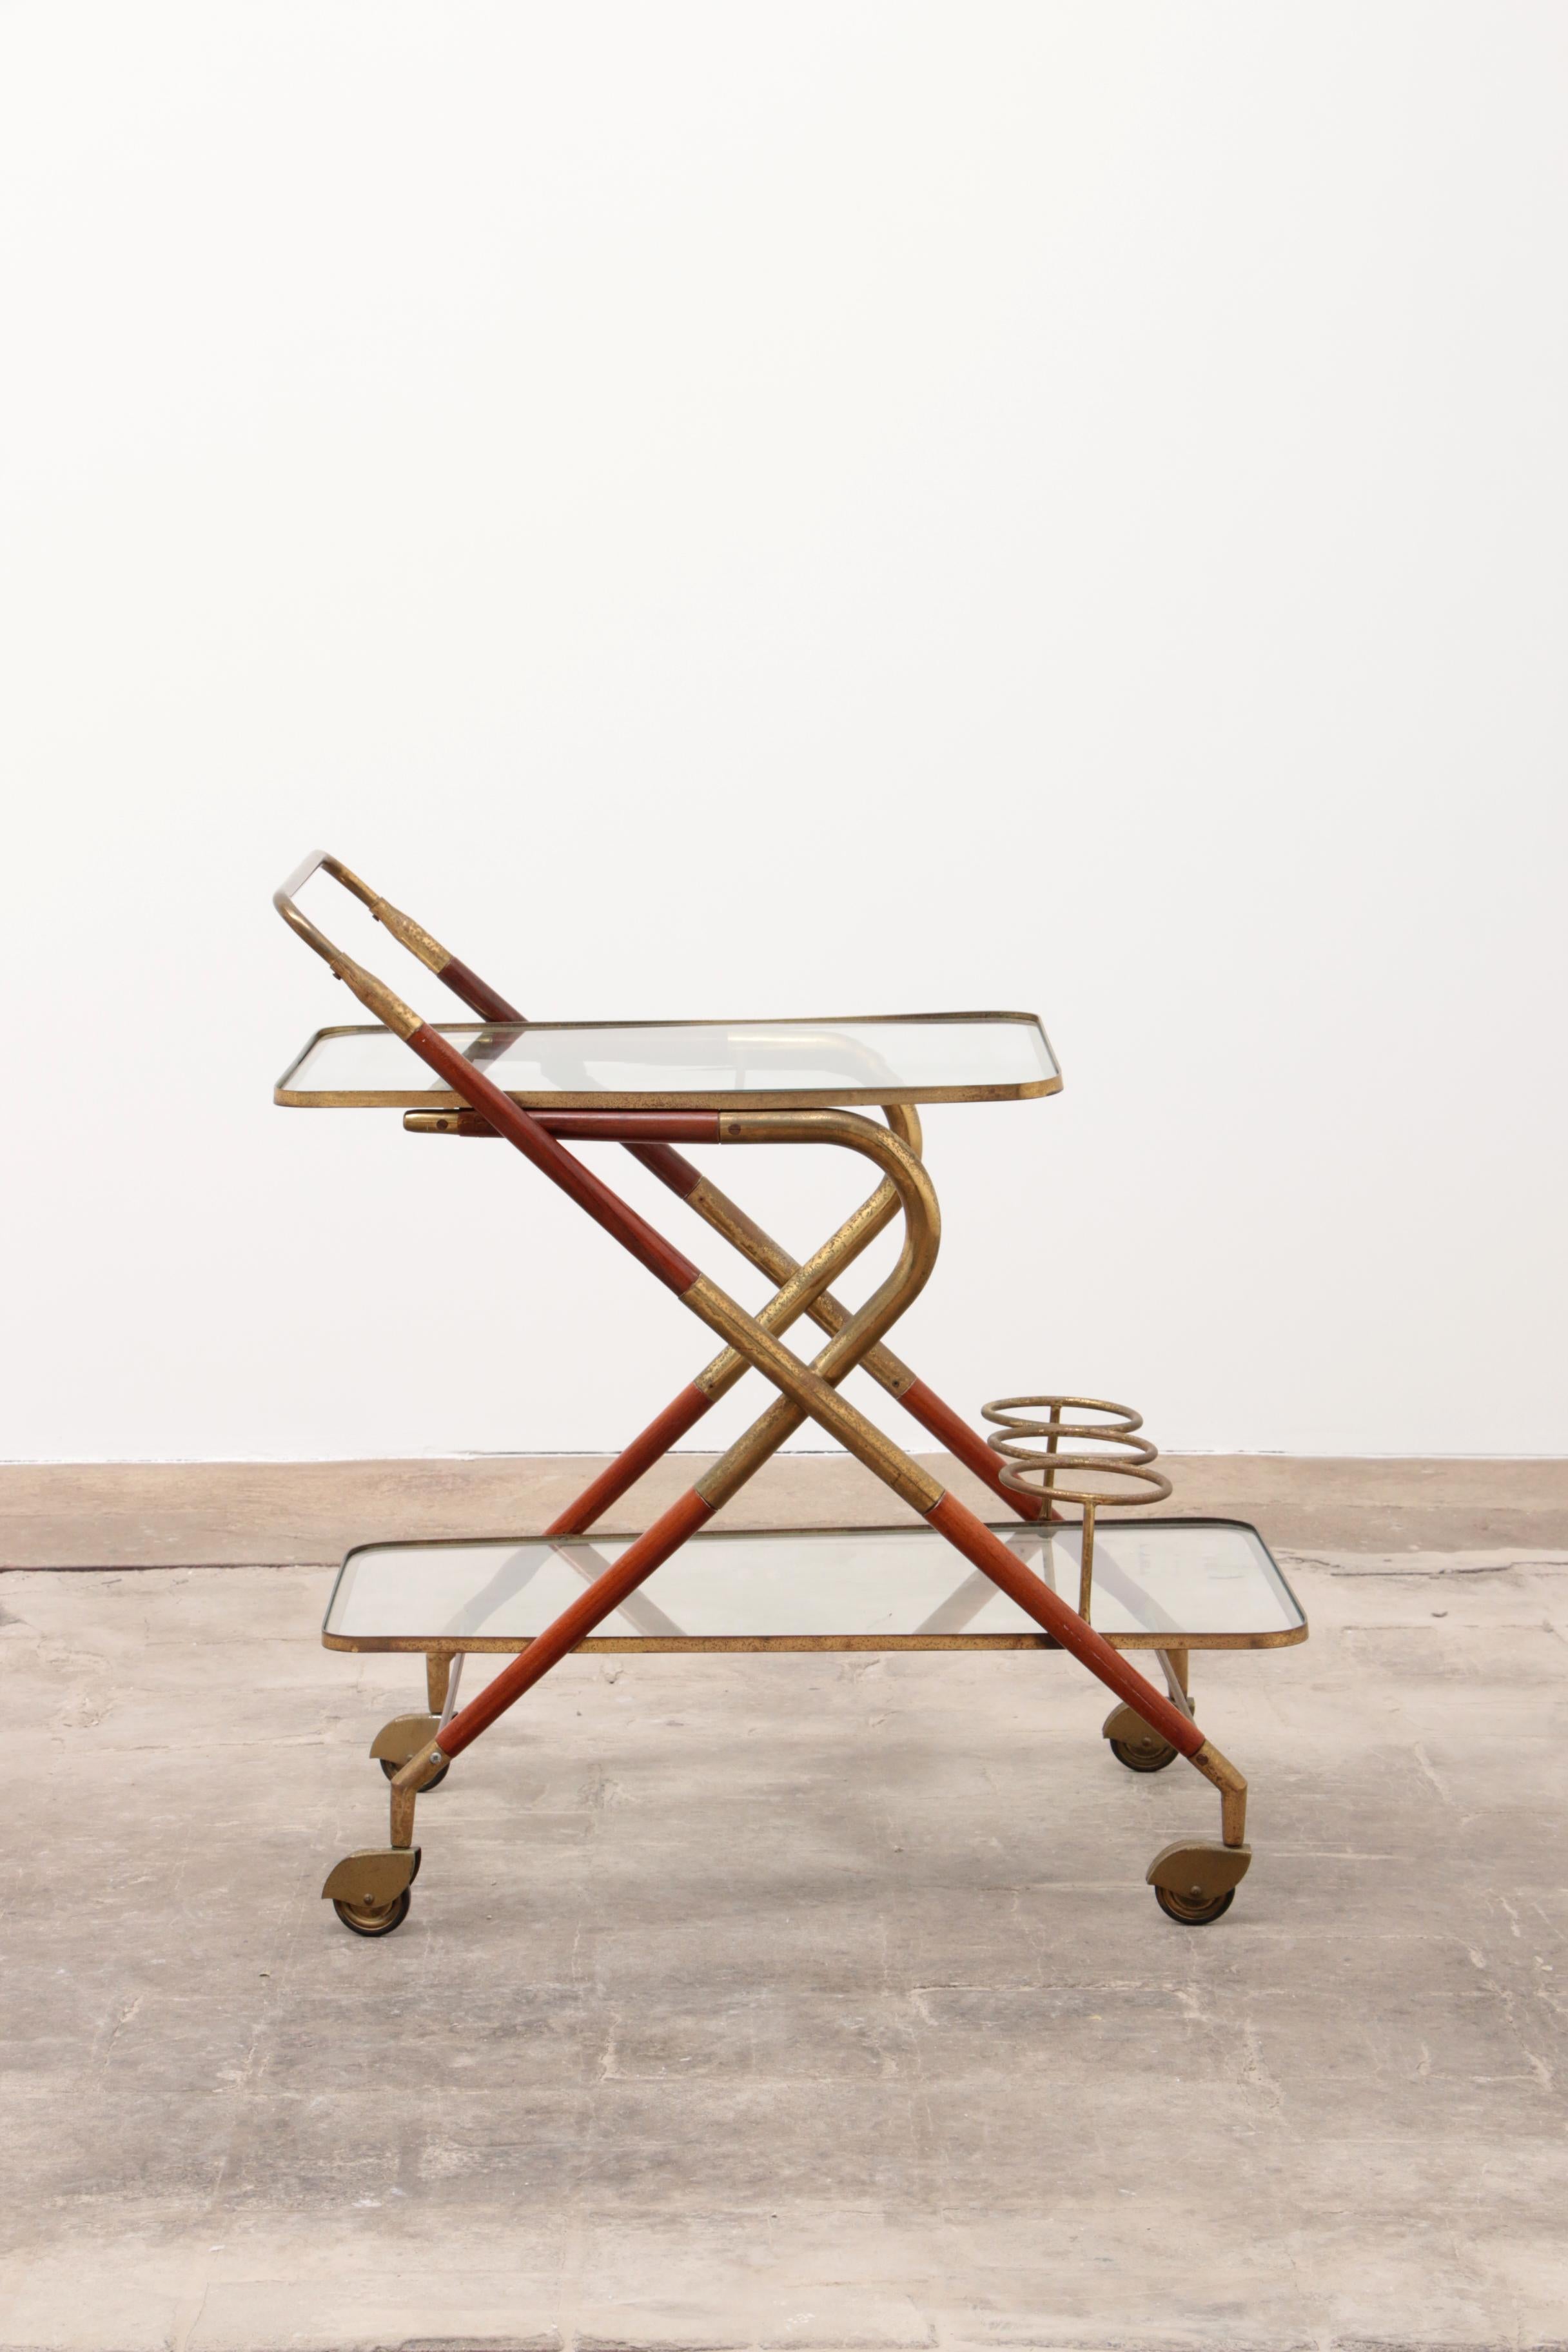 Copper Cesare Lacca 1960s Trolley Made by Cassina, Italy For Sale